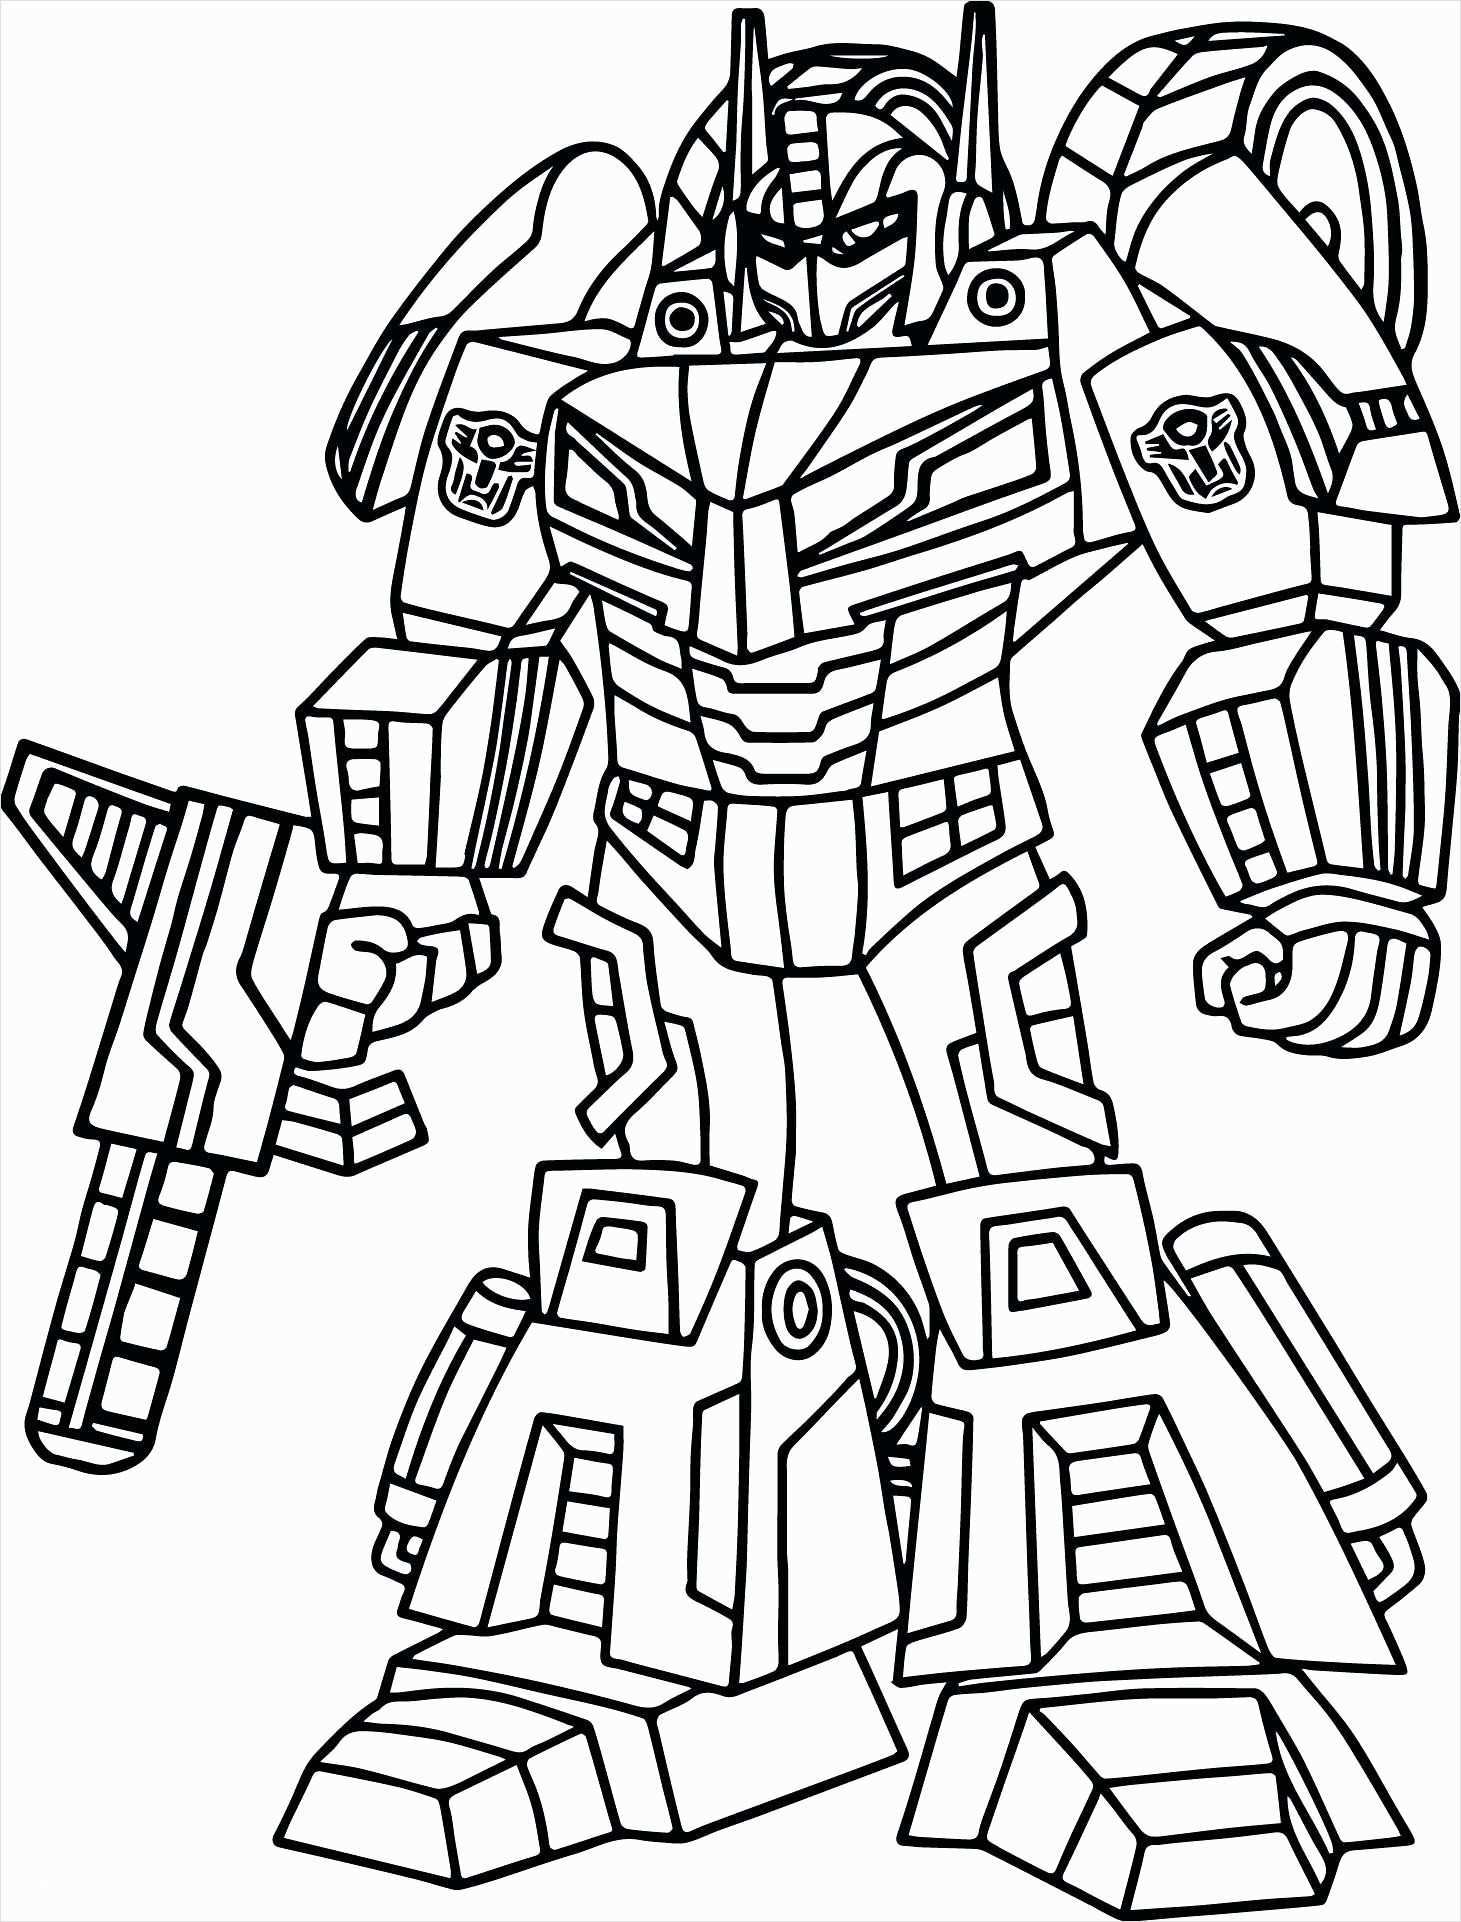 71-optimus-prime-transformers-coloring-pages-just-kids